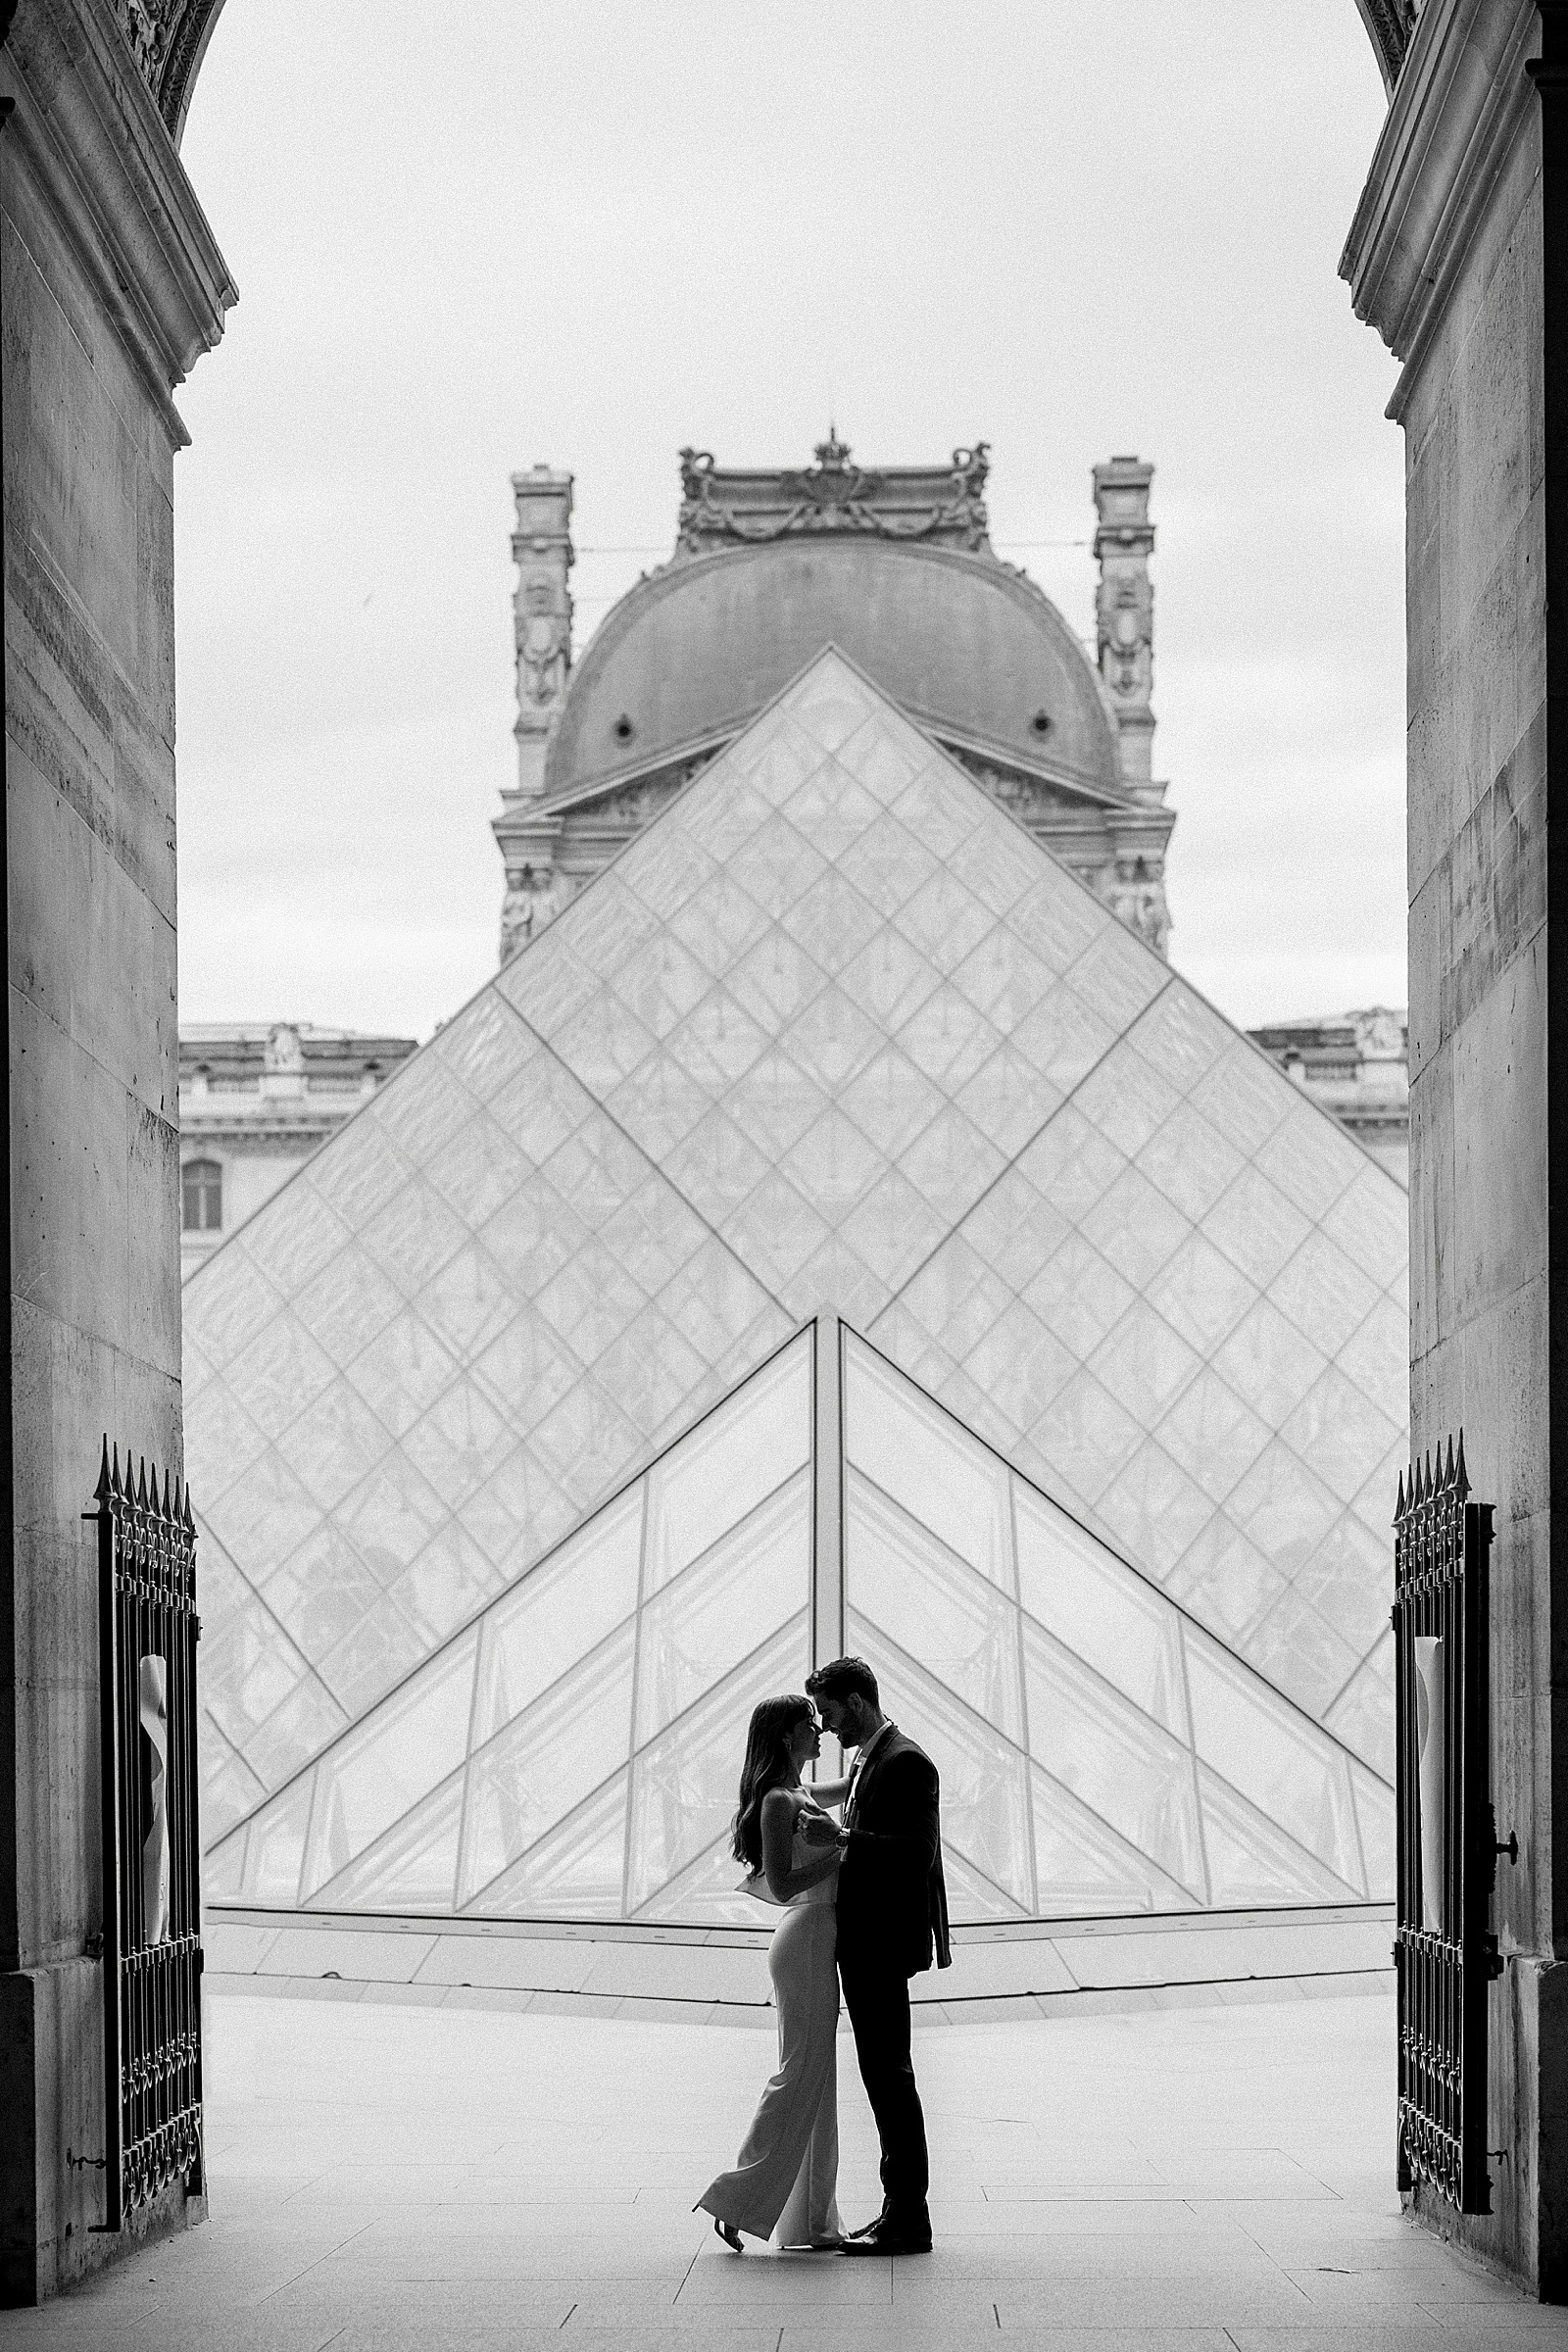 A couple is silhouetted against the glass triangle dome of the Louvre